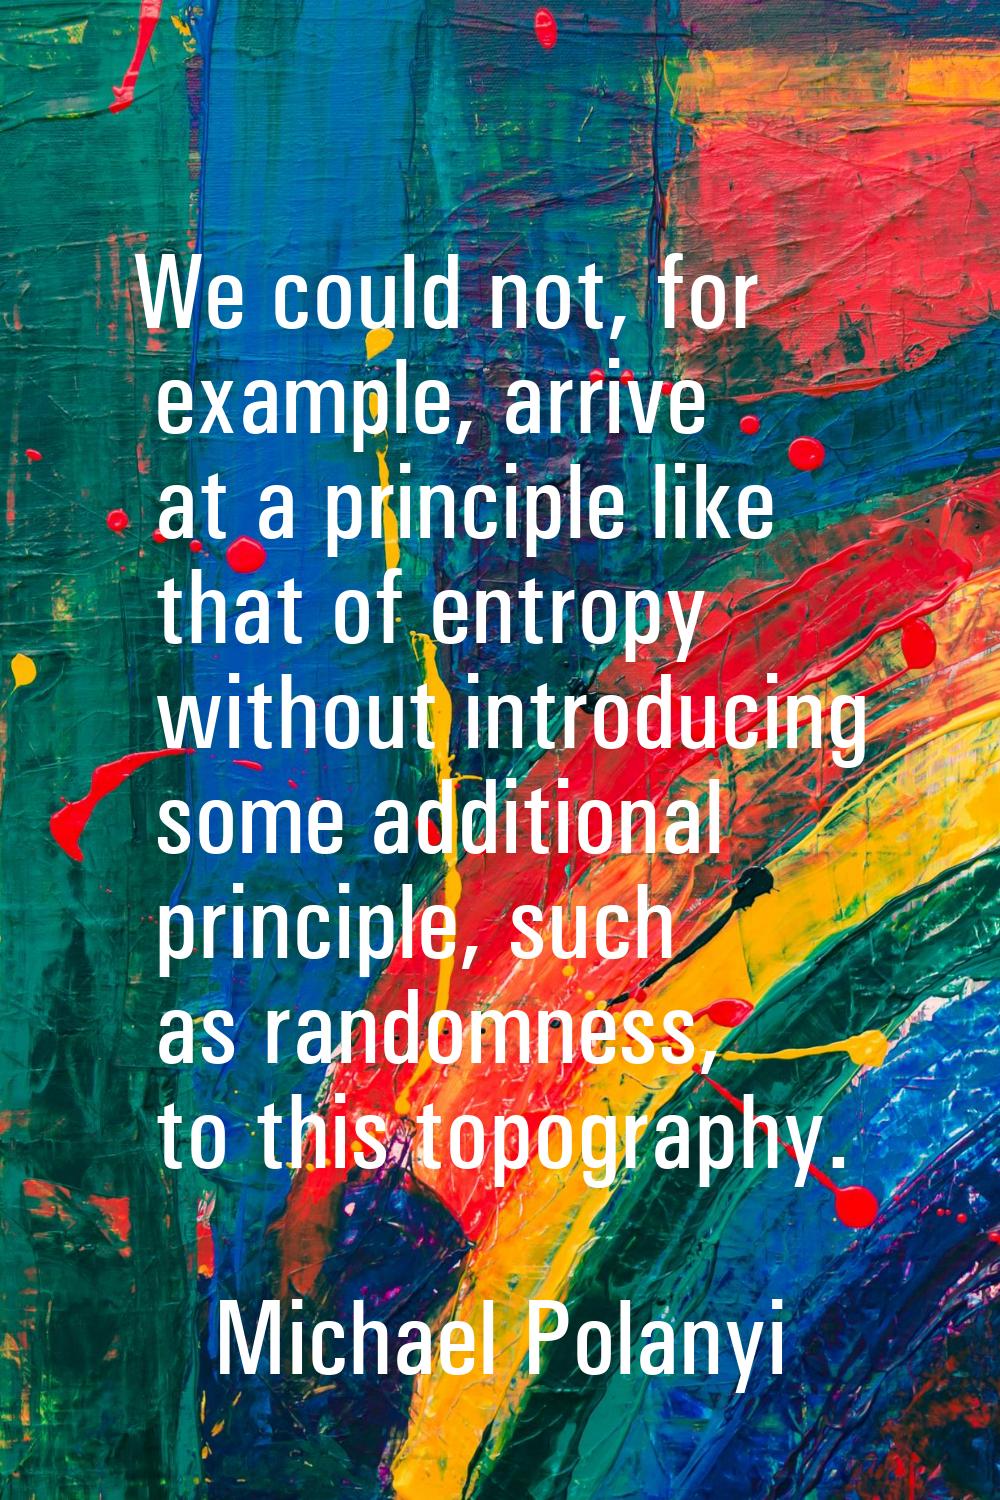 We could not, for example, arrive at a principle like that of entropy without introducing some addi